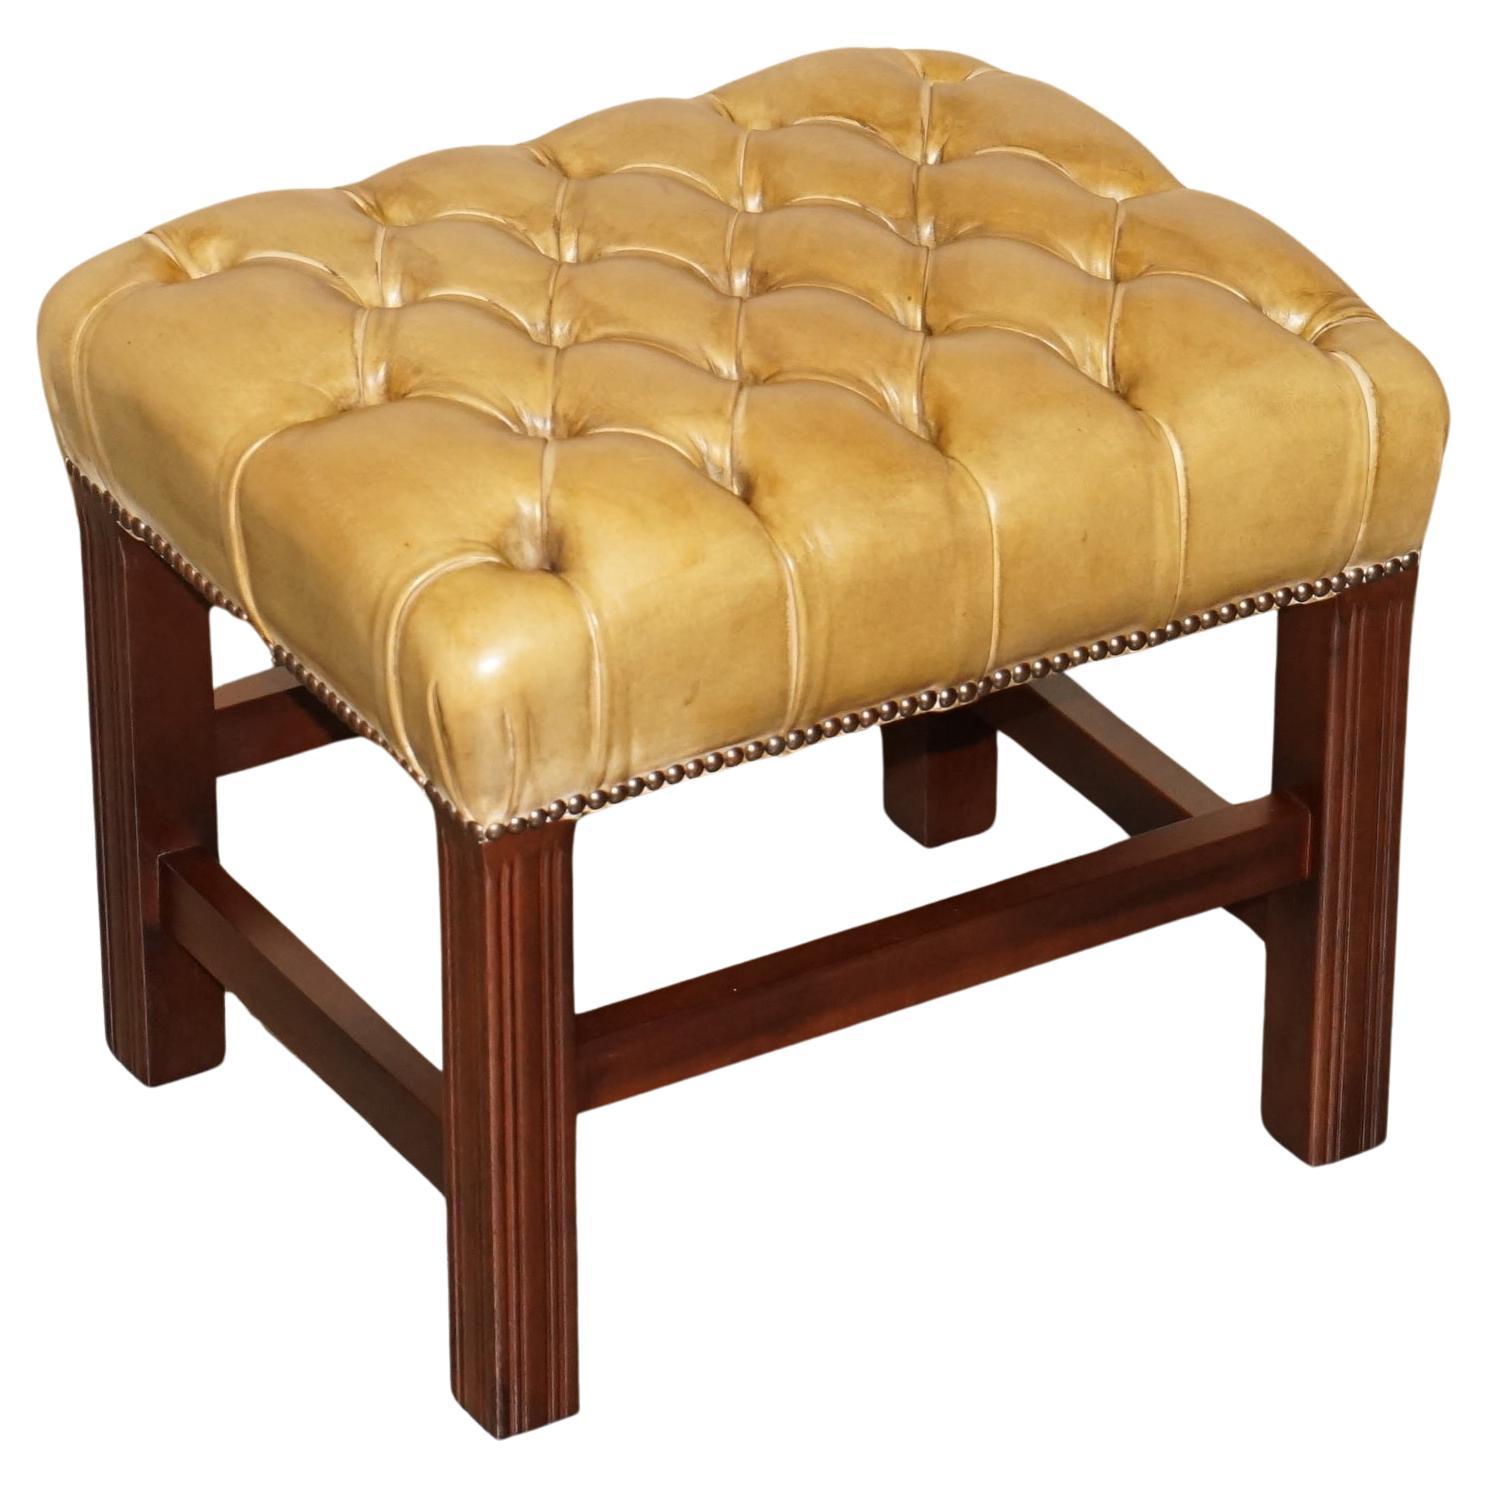 VINTAGE TAN BROWN LEATHER CHESTERFIELD TUFTED BARON FOOTSTOOL PART OF SUiTE